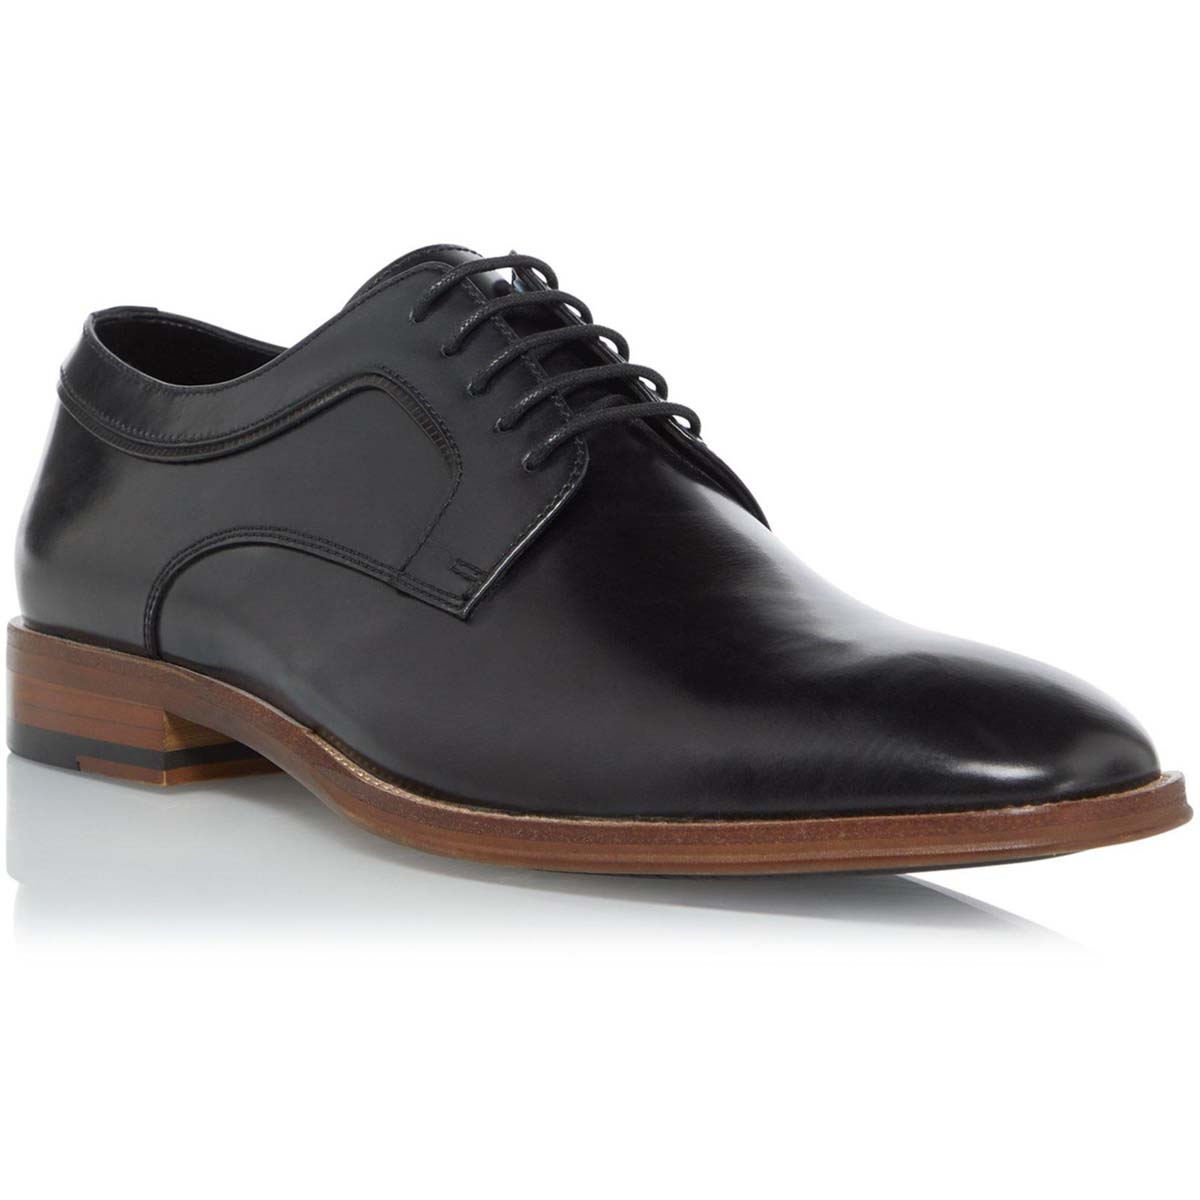 Dune London Sparrows Black Mens formal shoes 2775095201654 in a Plain Leather in Size 7